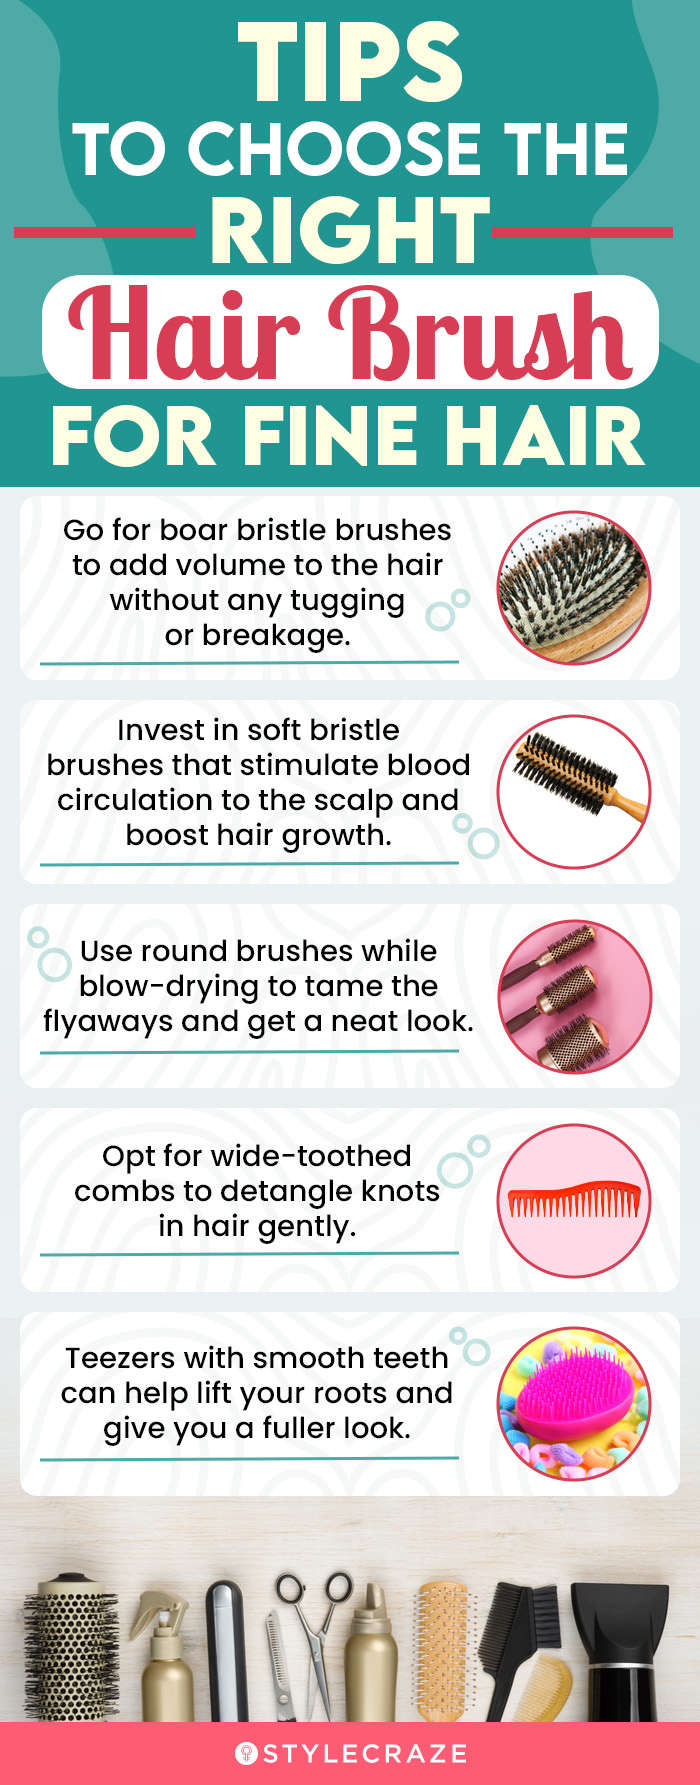 Tips To Choose The Right Hair Brush For Fine Hair